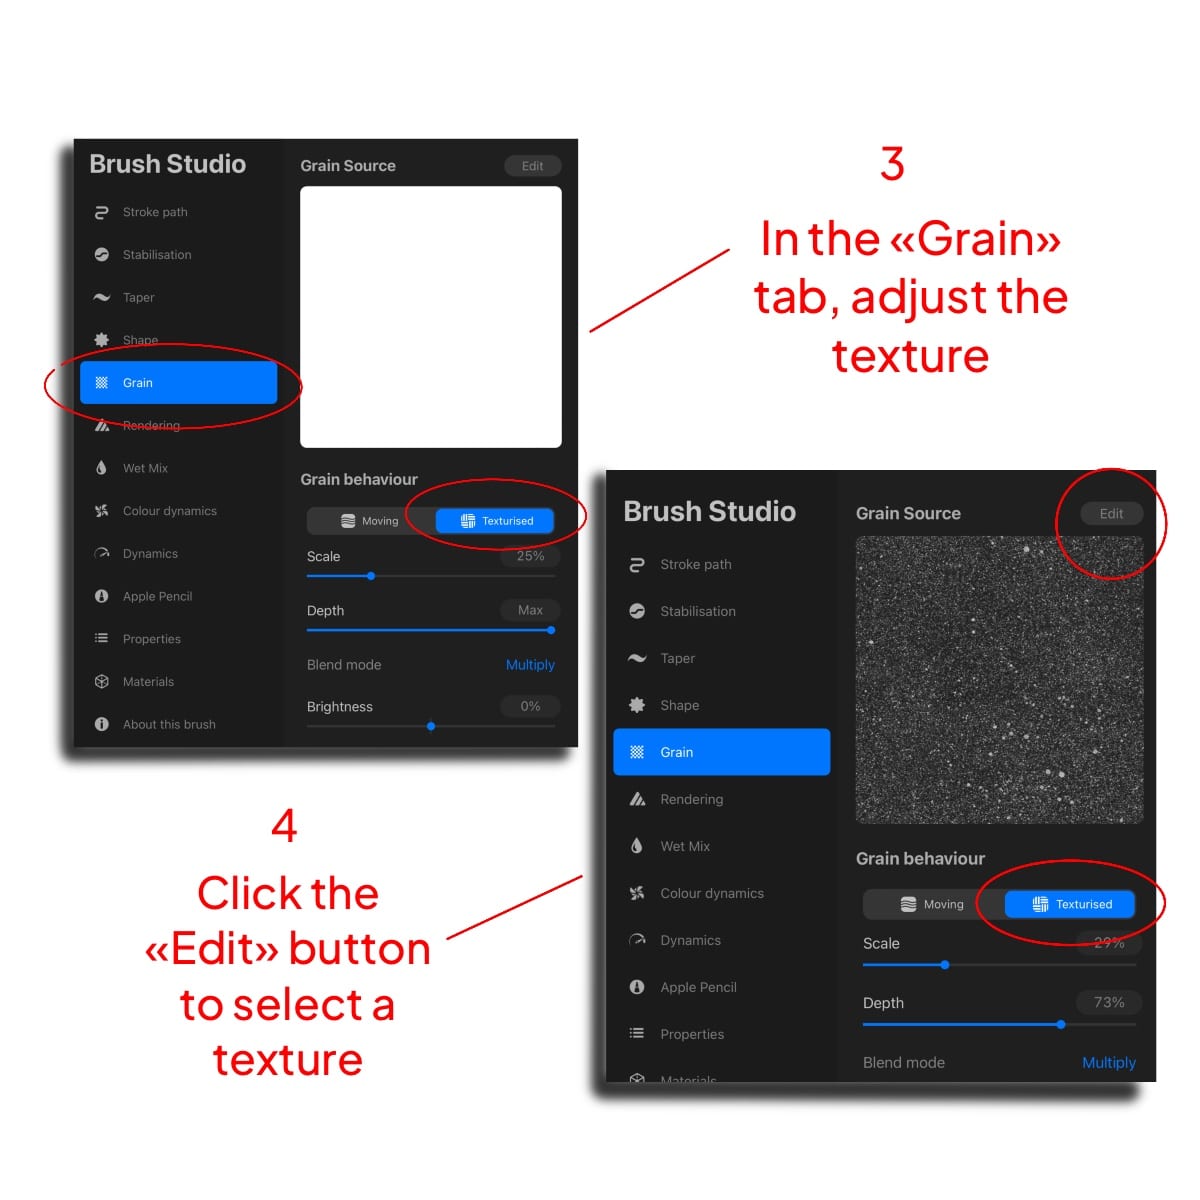 The "Brush Studio" Screen in Procreate, with the selected "Grain" option.